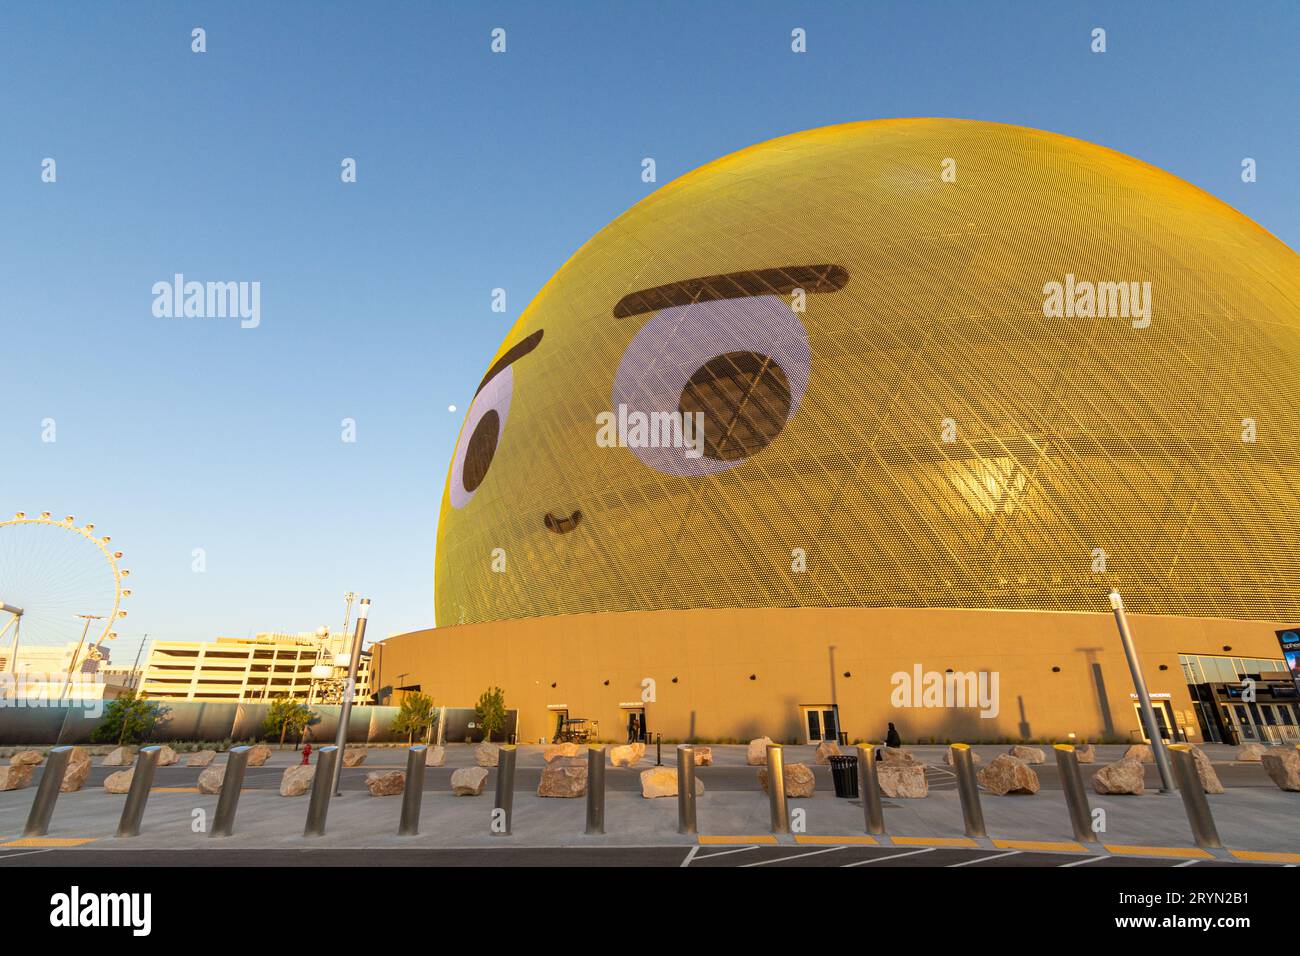 U2:UV Achtung Baby Live at Sphere premiered on Sept. 29, 2023 in MSG Entertainment's innovative performance venue. The outside - the Exosphere - is currently used to display art and advertising. Stock Photo